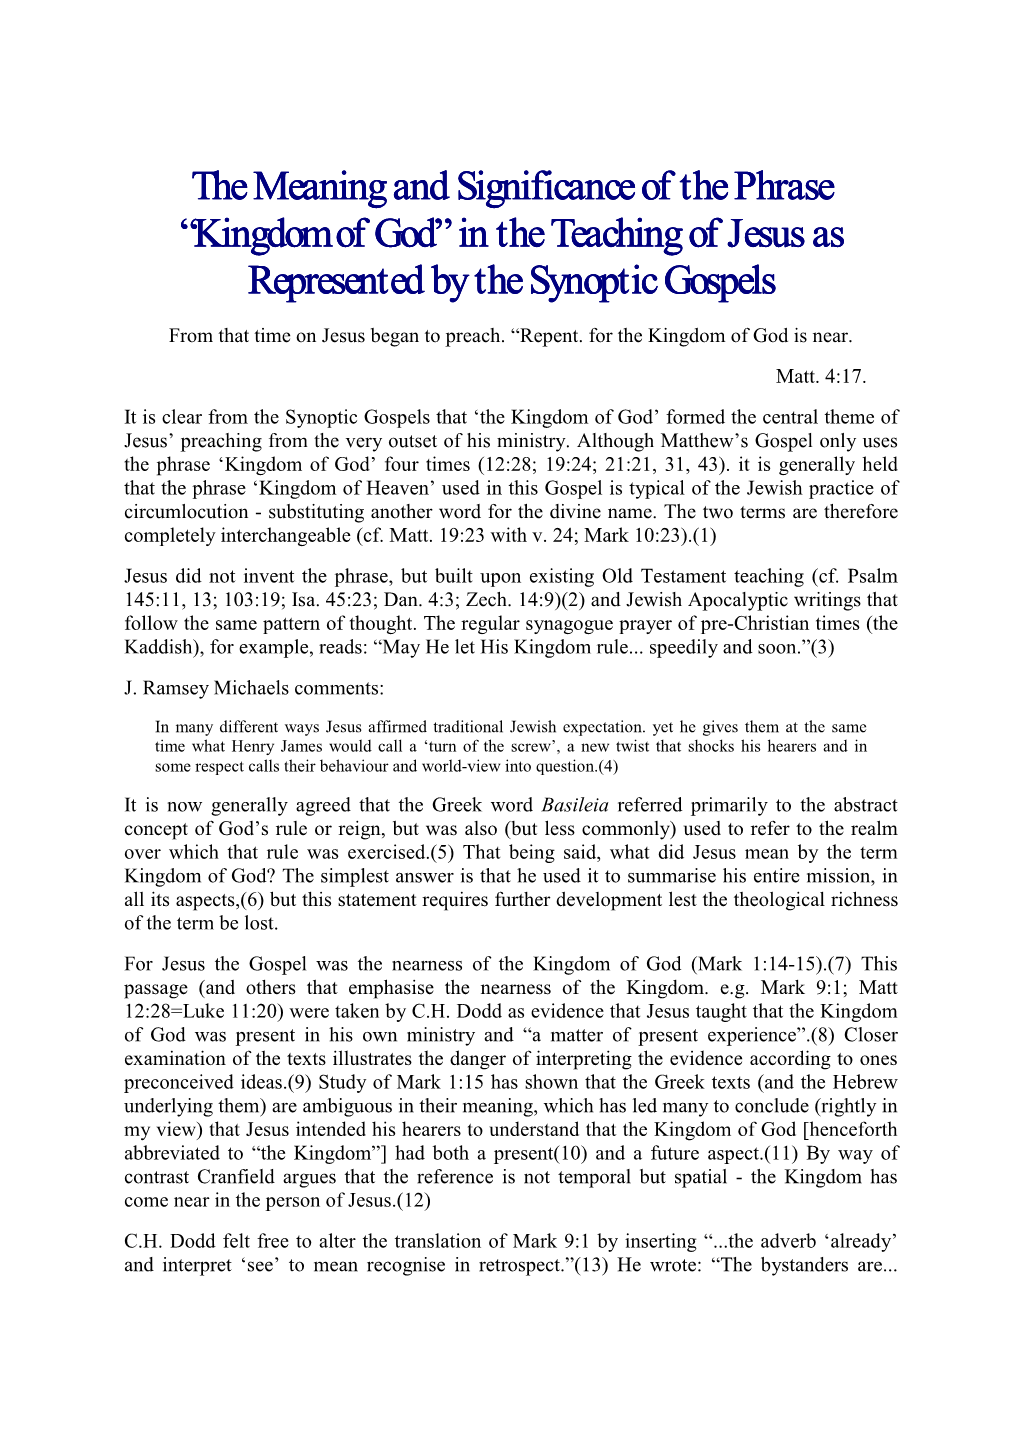 Kingdom of God” in the Teaching of Jesus As Represented by the Synoptic Gospels from That Time on Jesus Began to Preach